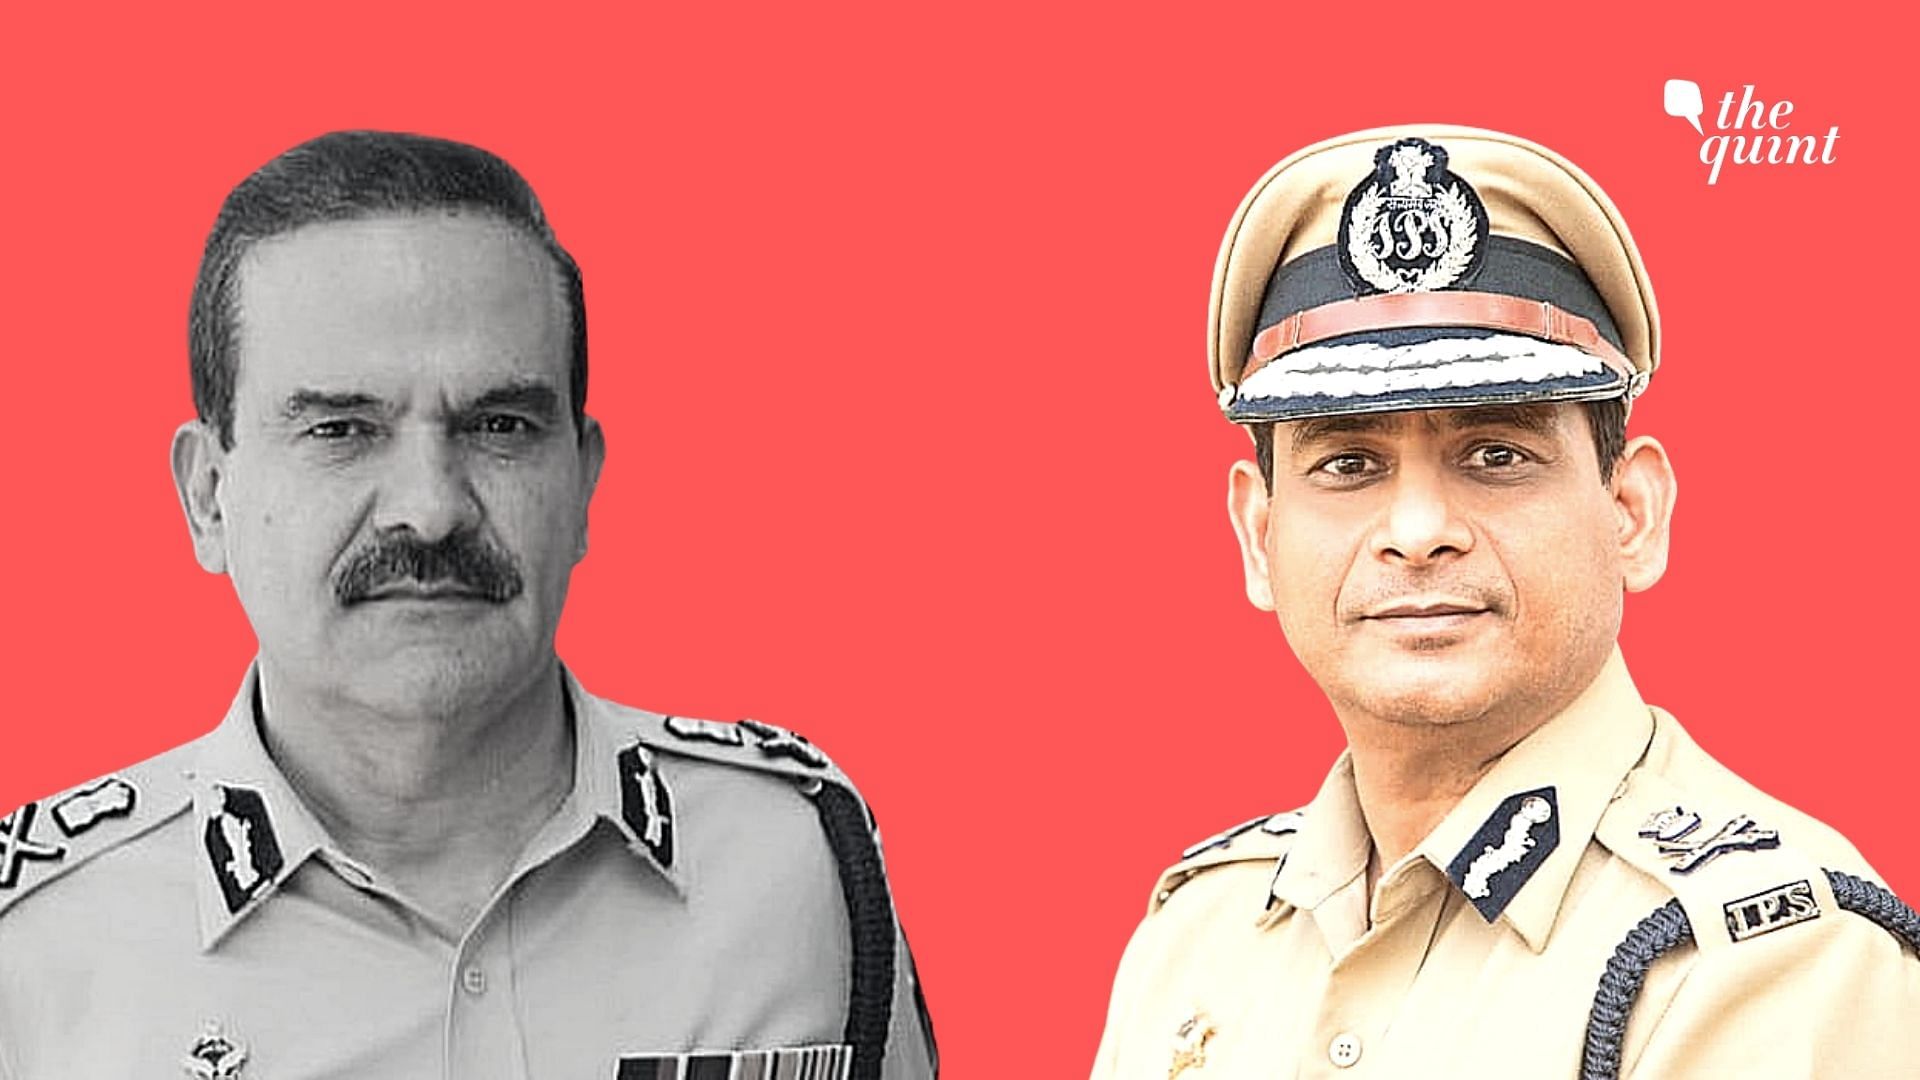 Hemant Nagrale (right) has been appointed as the new commissioner of Mumbai Police.